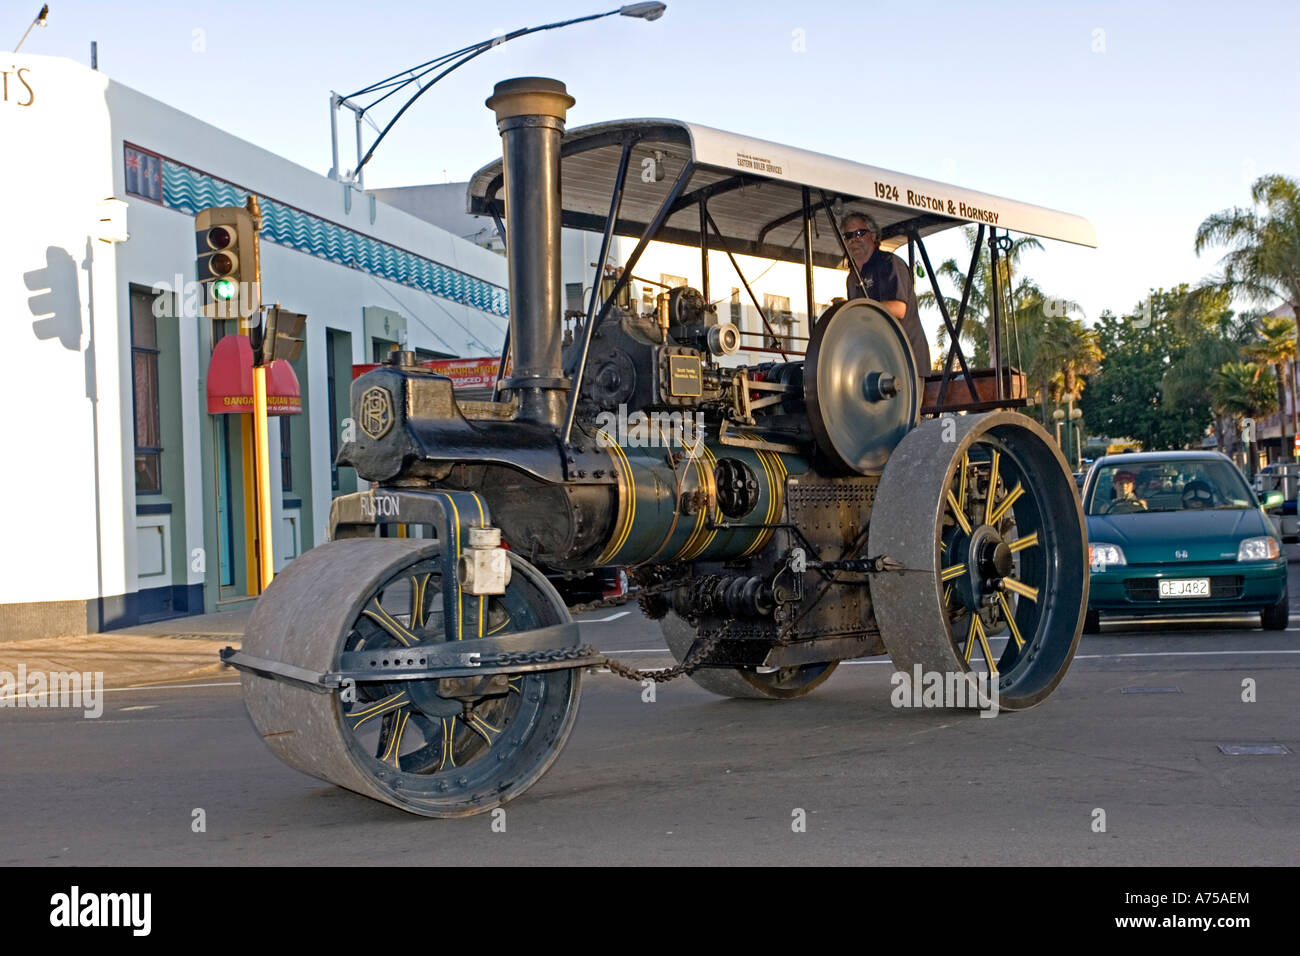 1924 Ruston and Hornsby steam engine at Art Deco weekend Napier North Island New Zealand Stock Photo